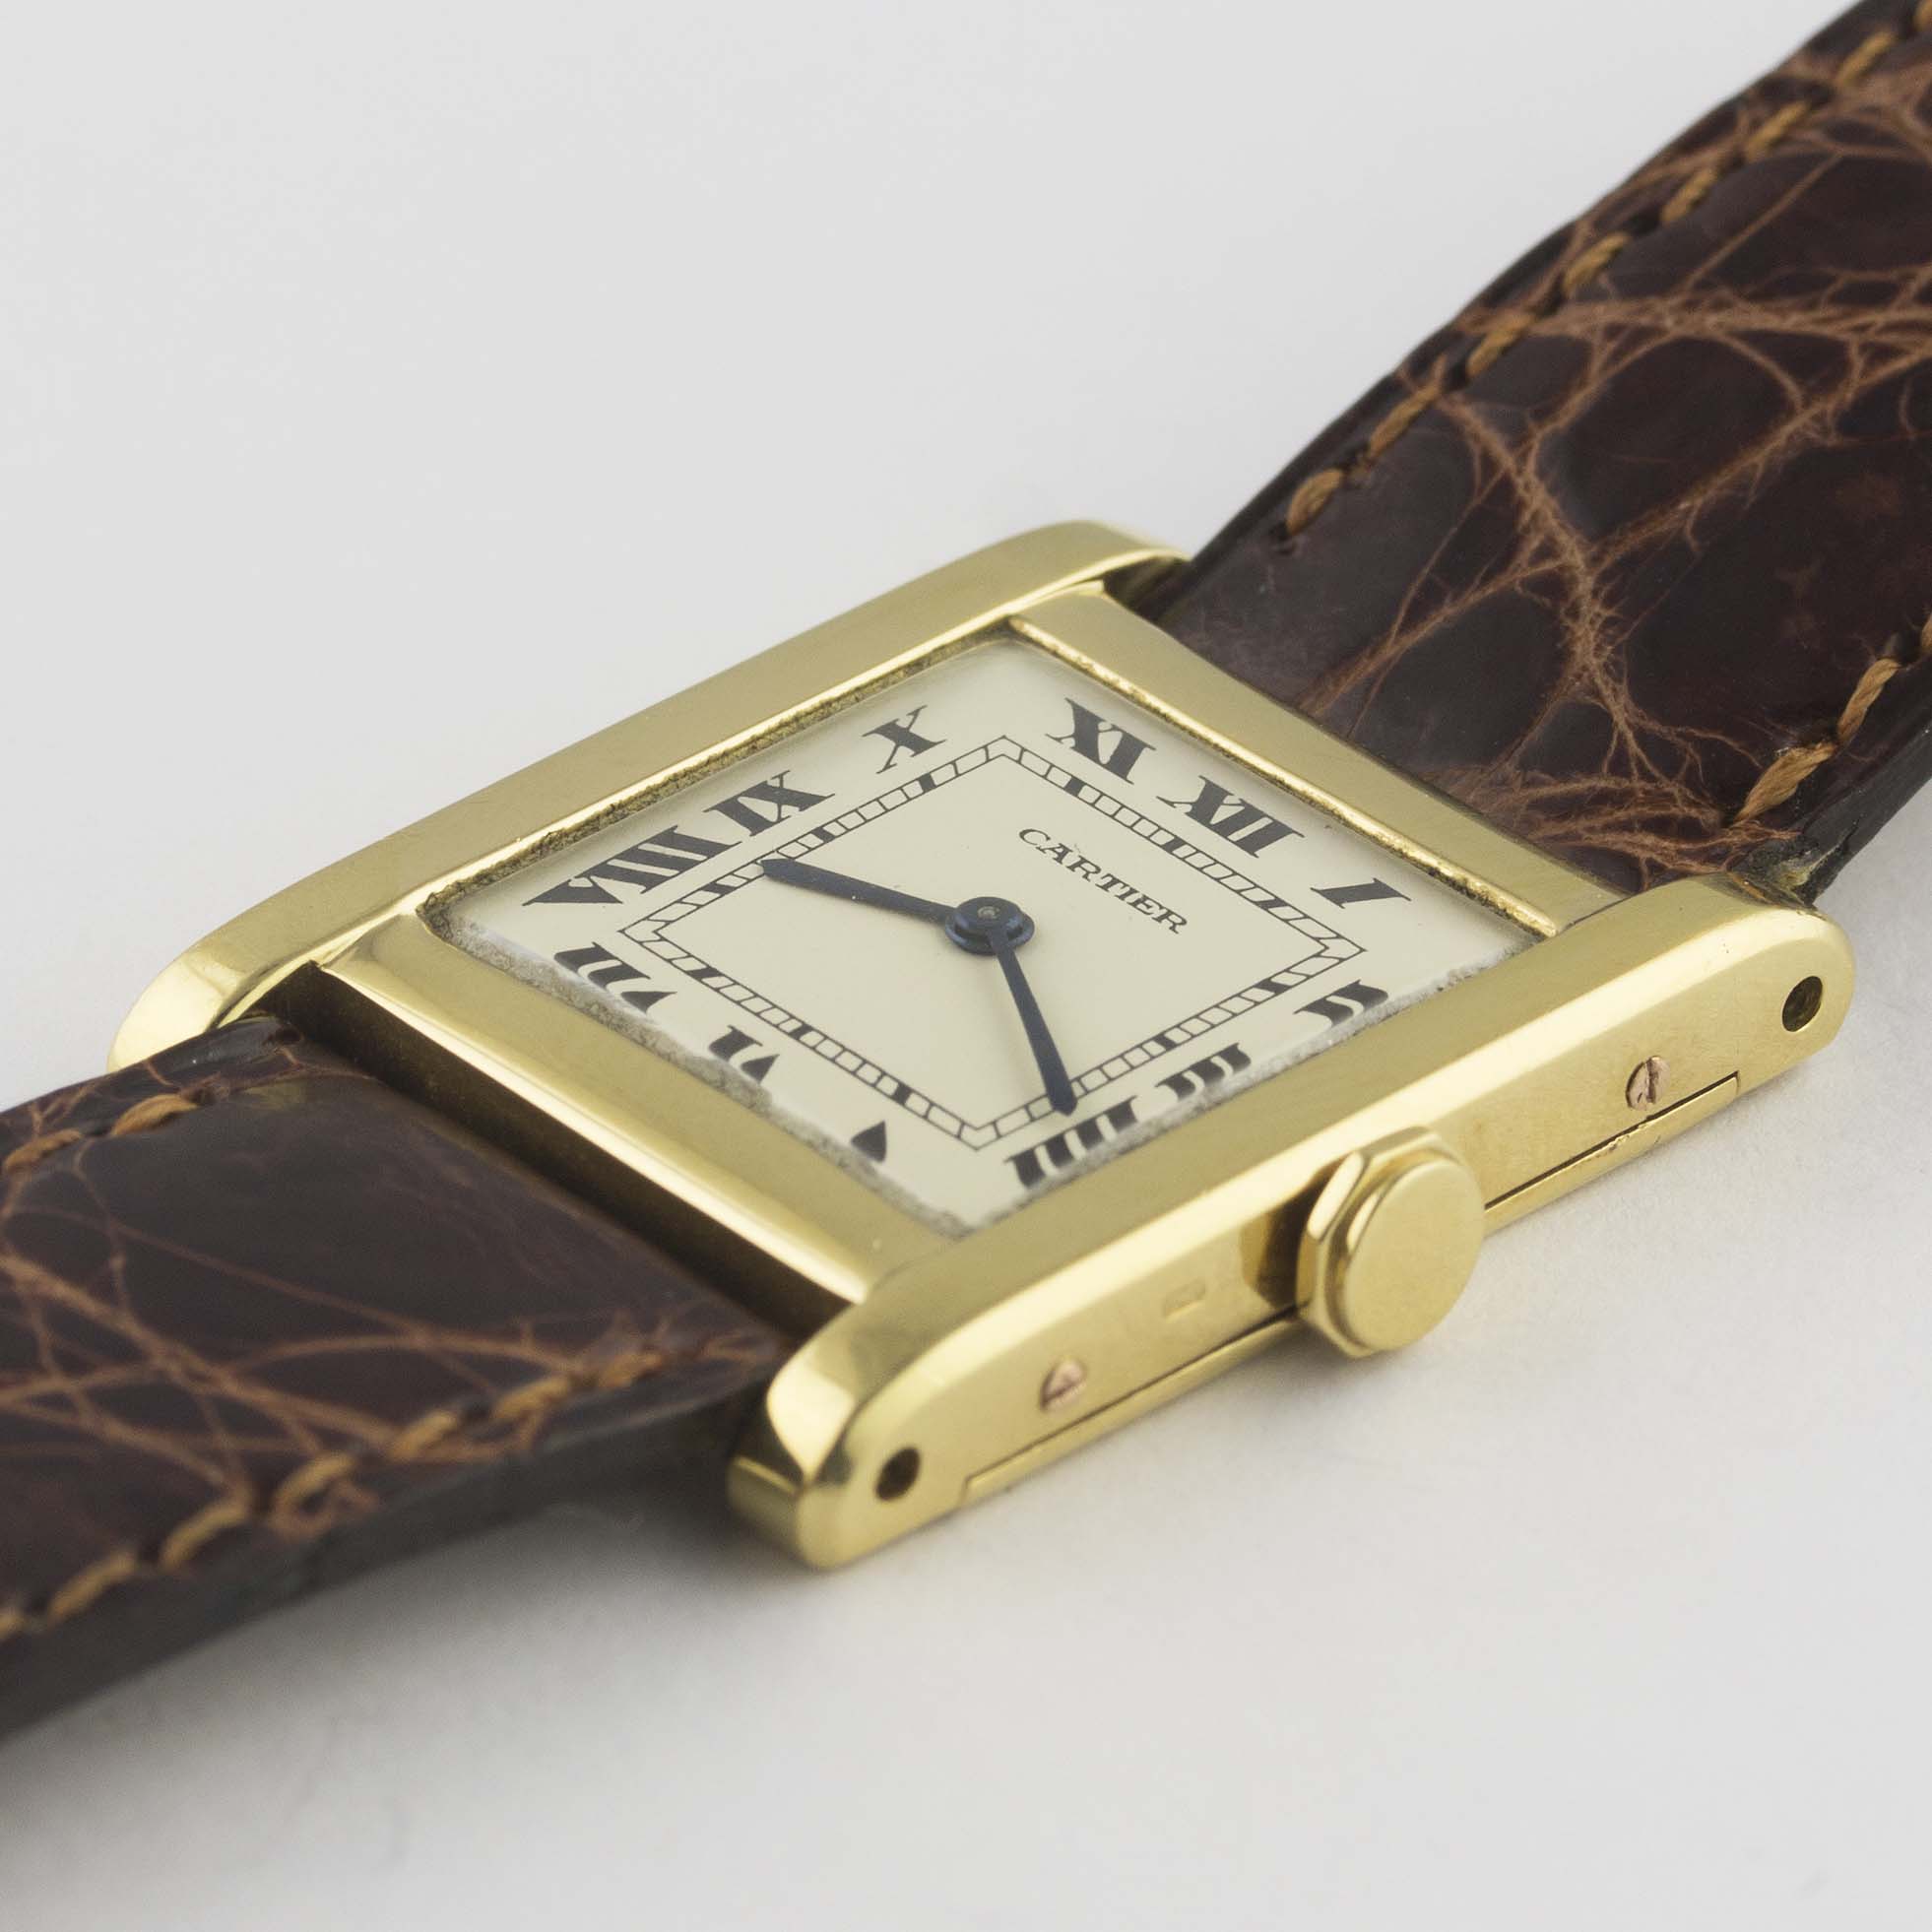 A RARE GENTLEMAN'S 18K SOLID GOLD CARTIER TANK NORMALE WRIST WATCH CIRCA 1960, WITH CARTIER BOX - Image 3 of 12